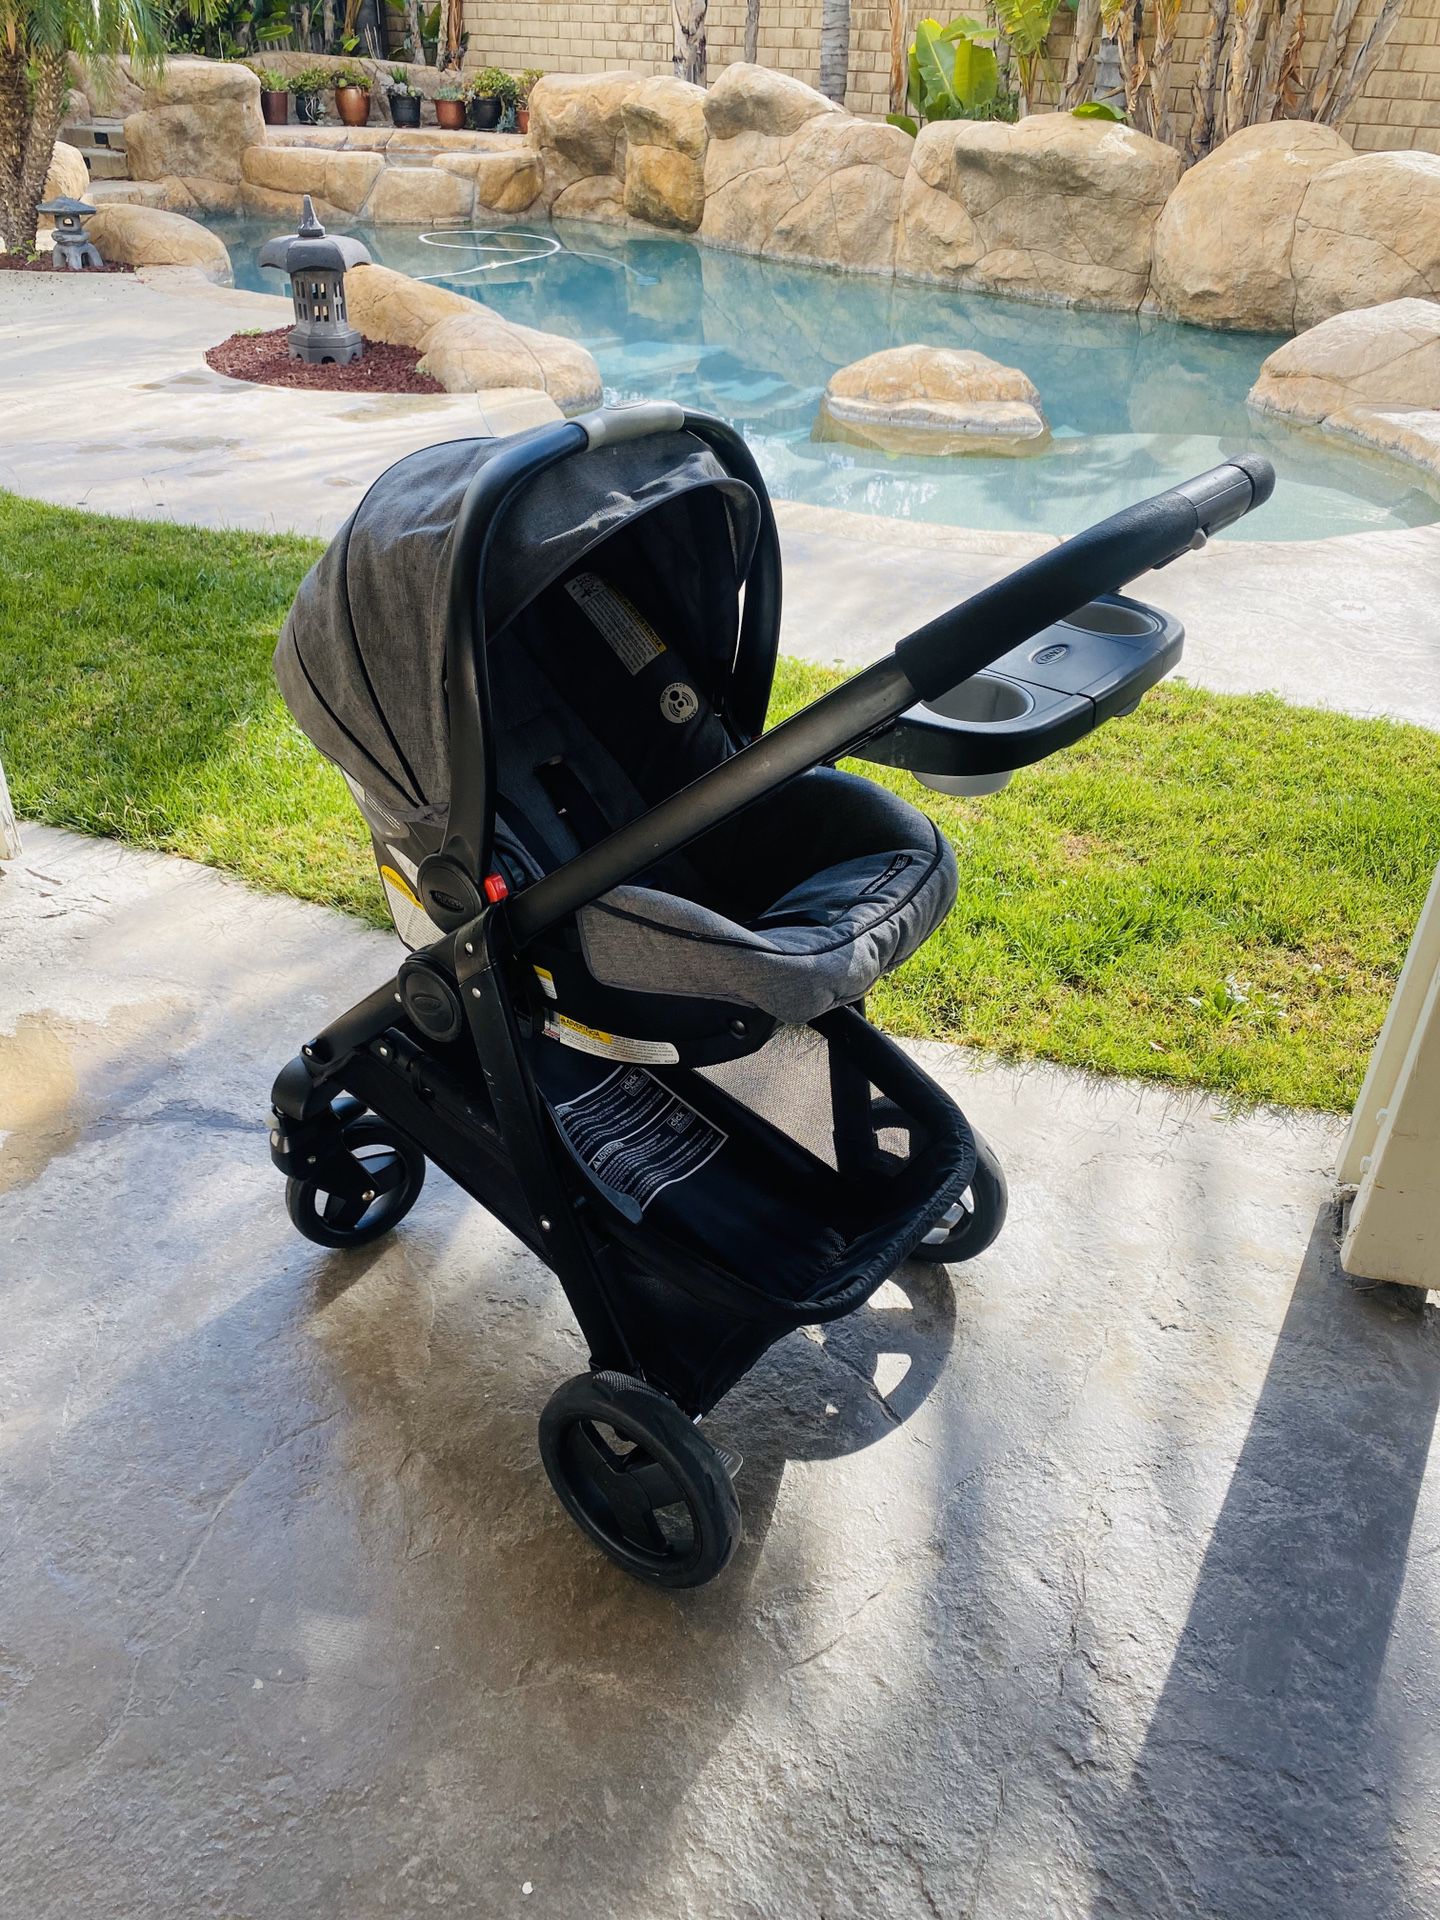 Graco Stroller/Car seat/Carrier comes with base for the car